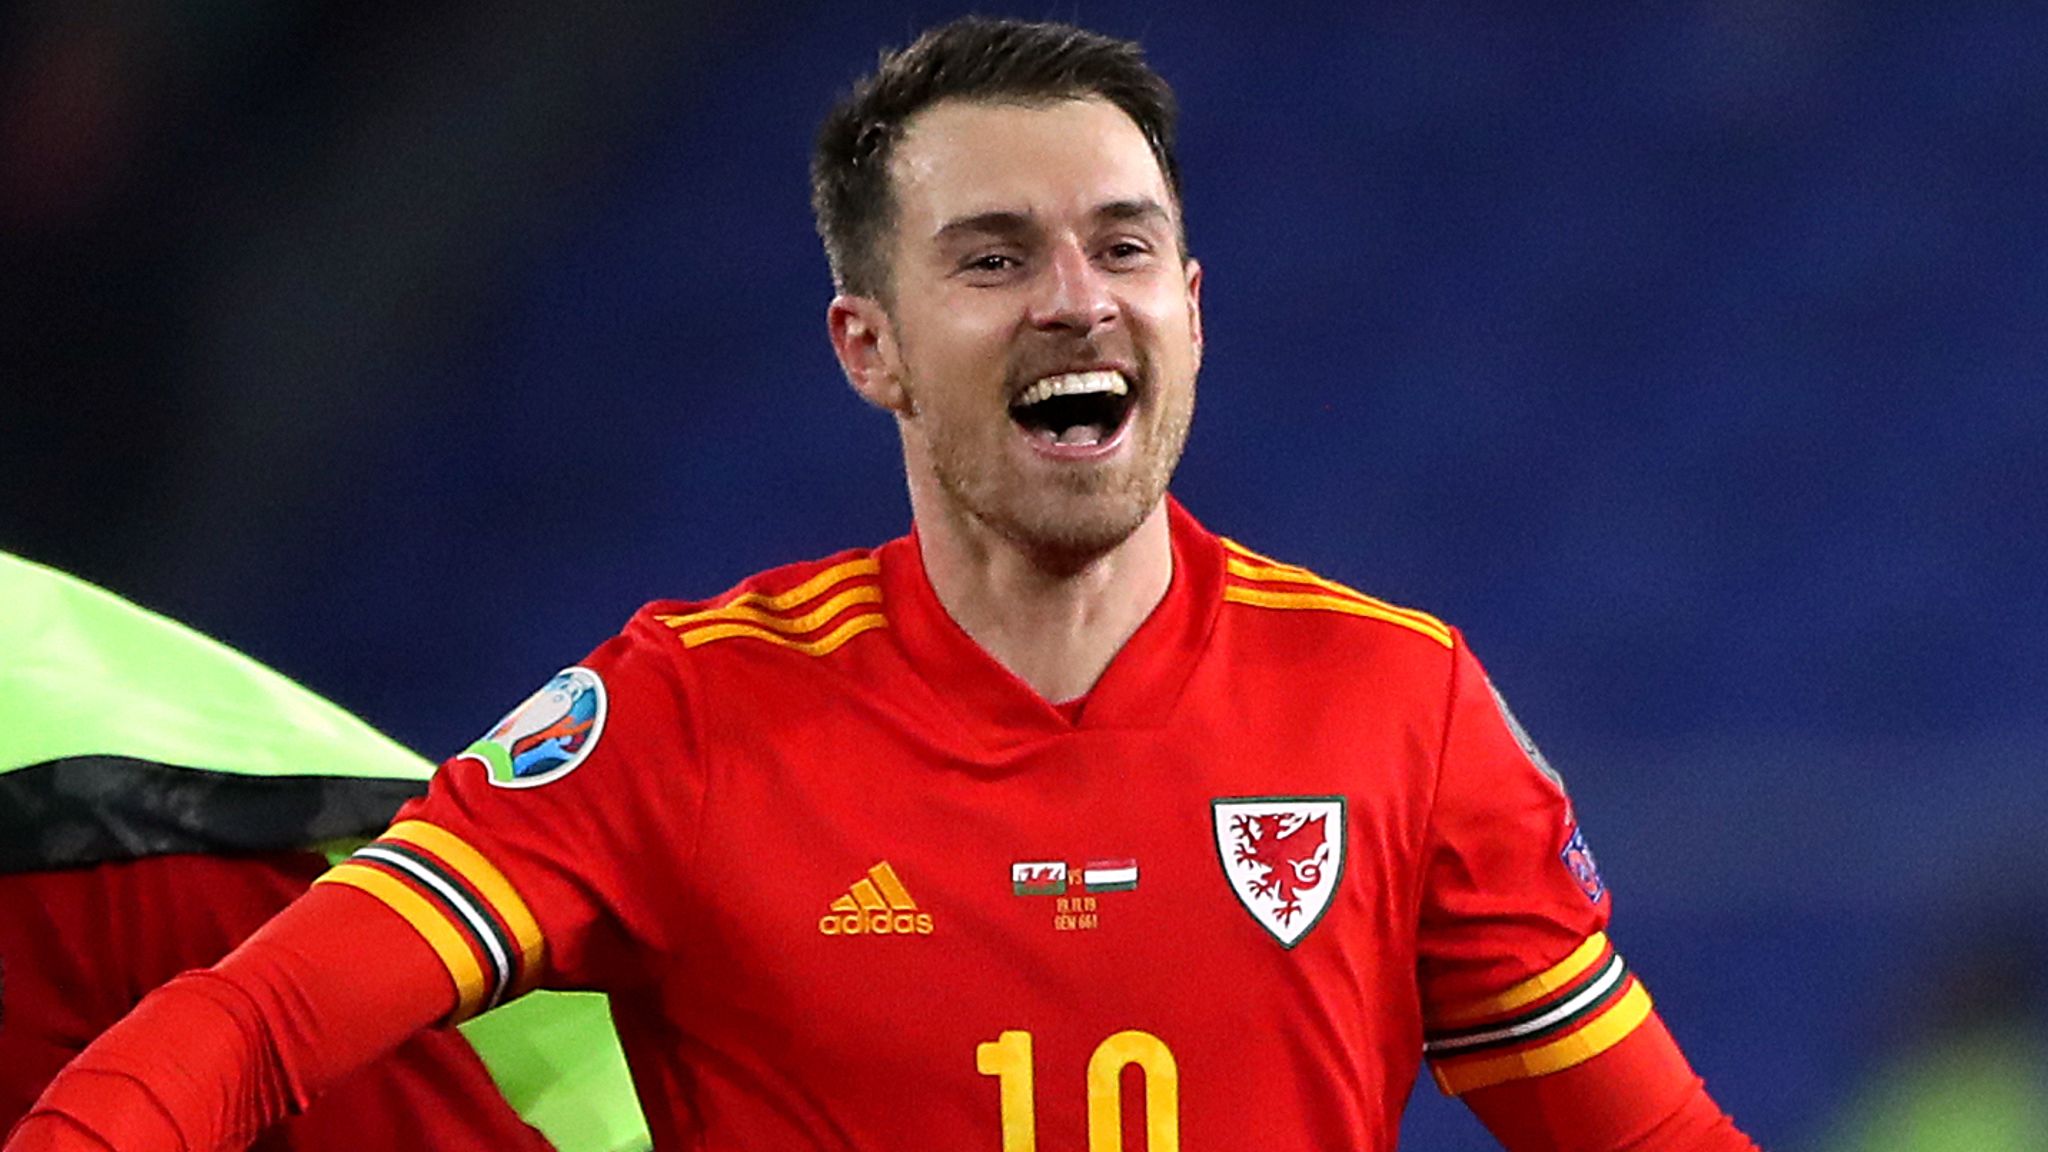 Aaron Ramsey: Wales captain and former Arsenal midfielder set for Cardiff  City medical after rejecting Saudi Arabia move | Football News | Sky Sports